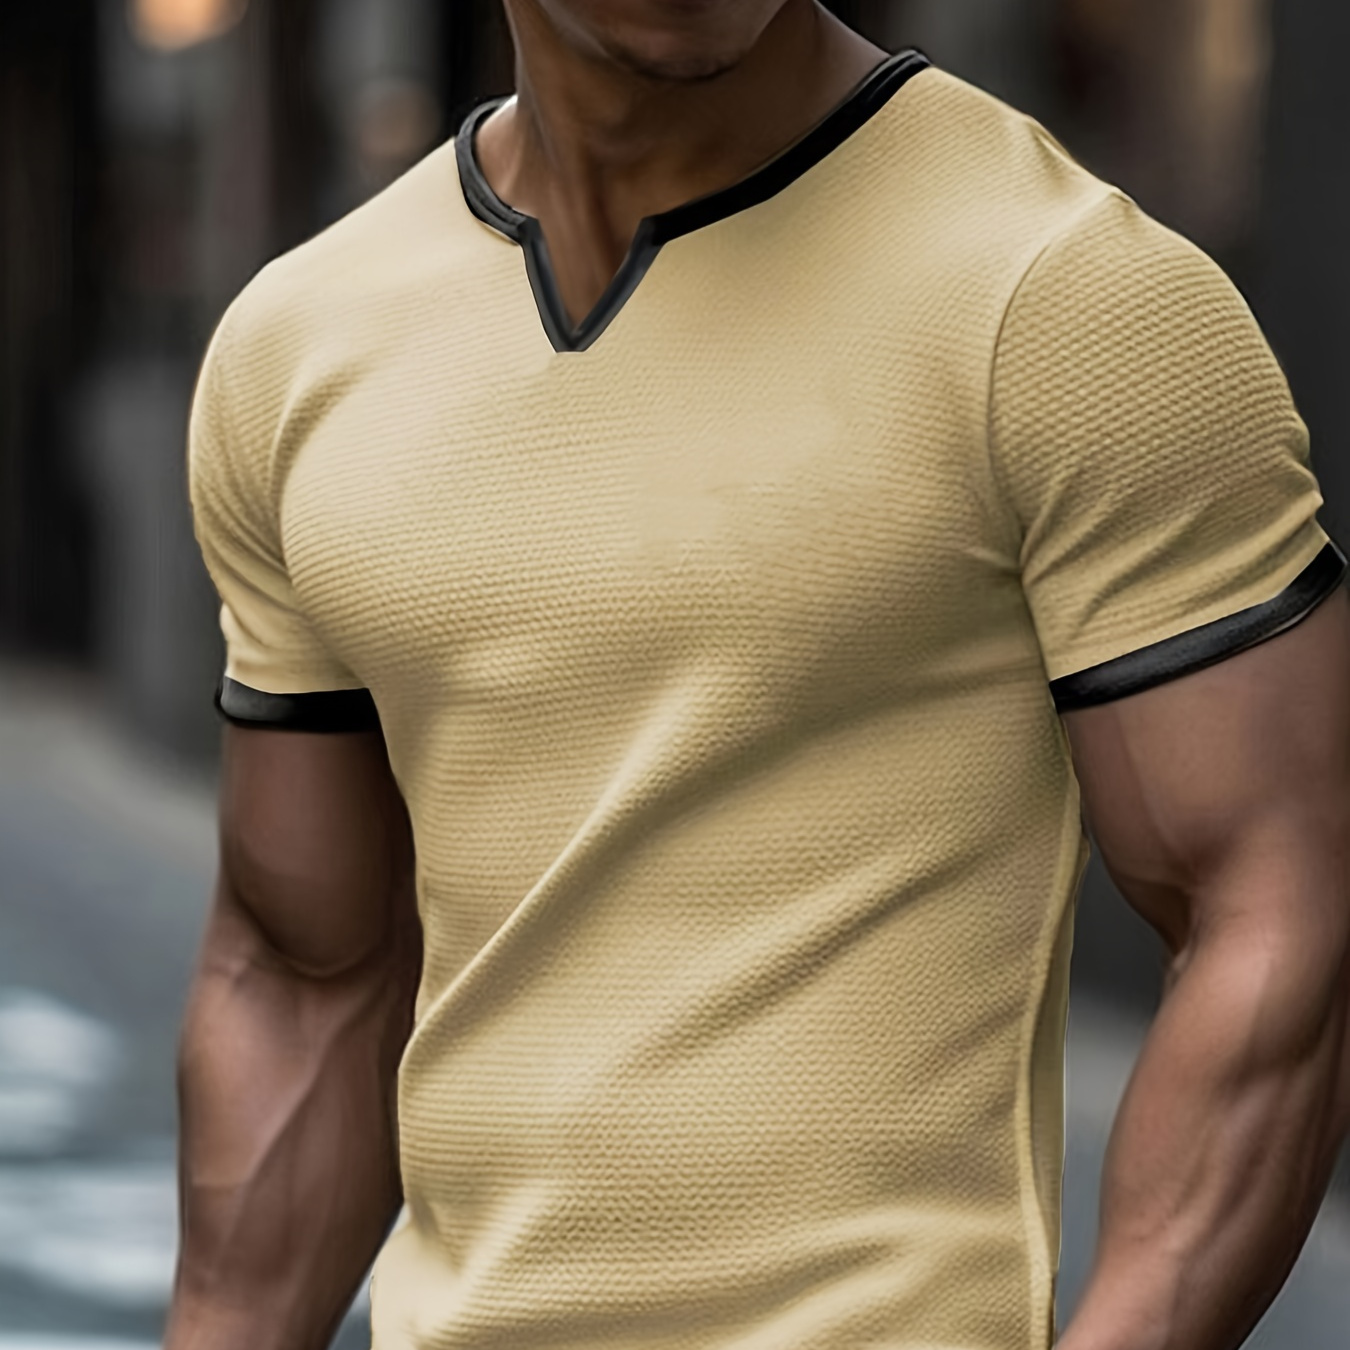 

Men's Solid Colour Short Sleeve T-shirts, Comfy Casual Elastic Vintage Tops For Men's Outdoor Activities, Summer